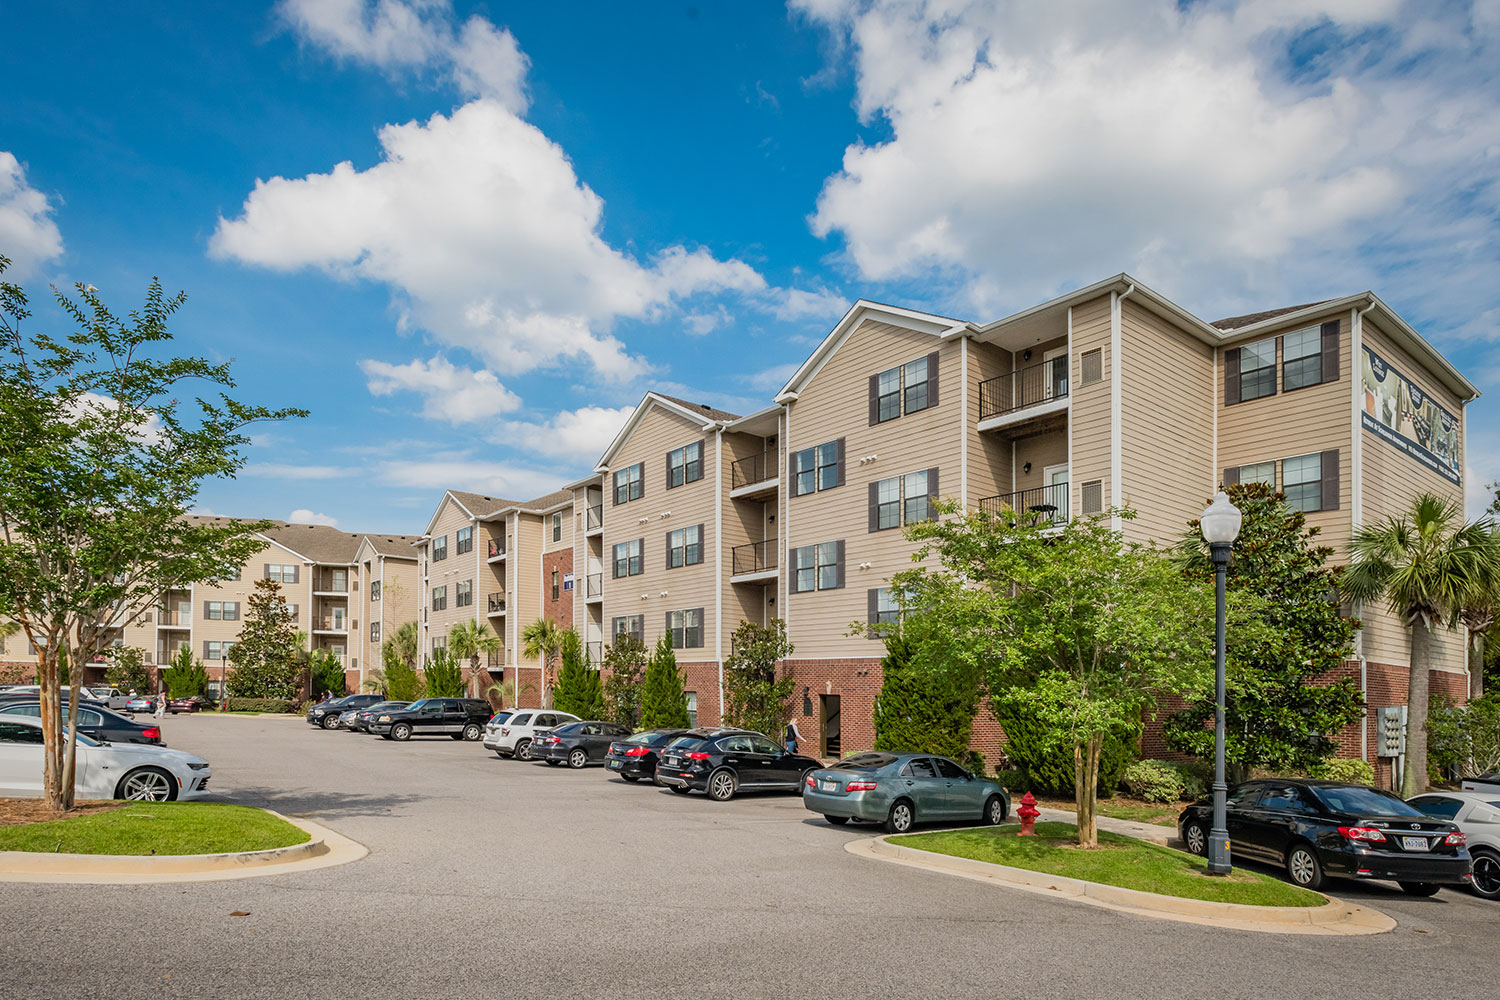 Balfour Beatty Communities acquires 530 units in two-property multifamily deal